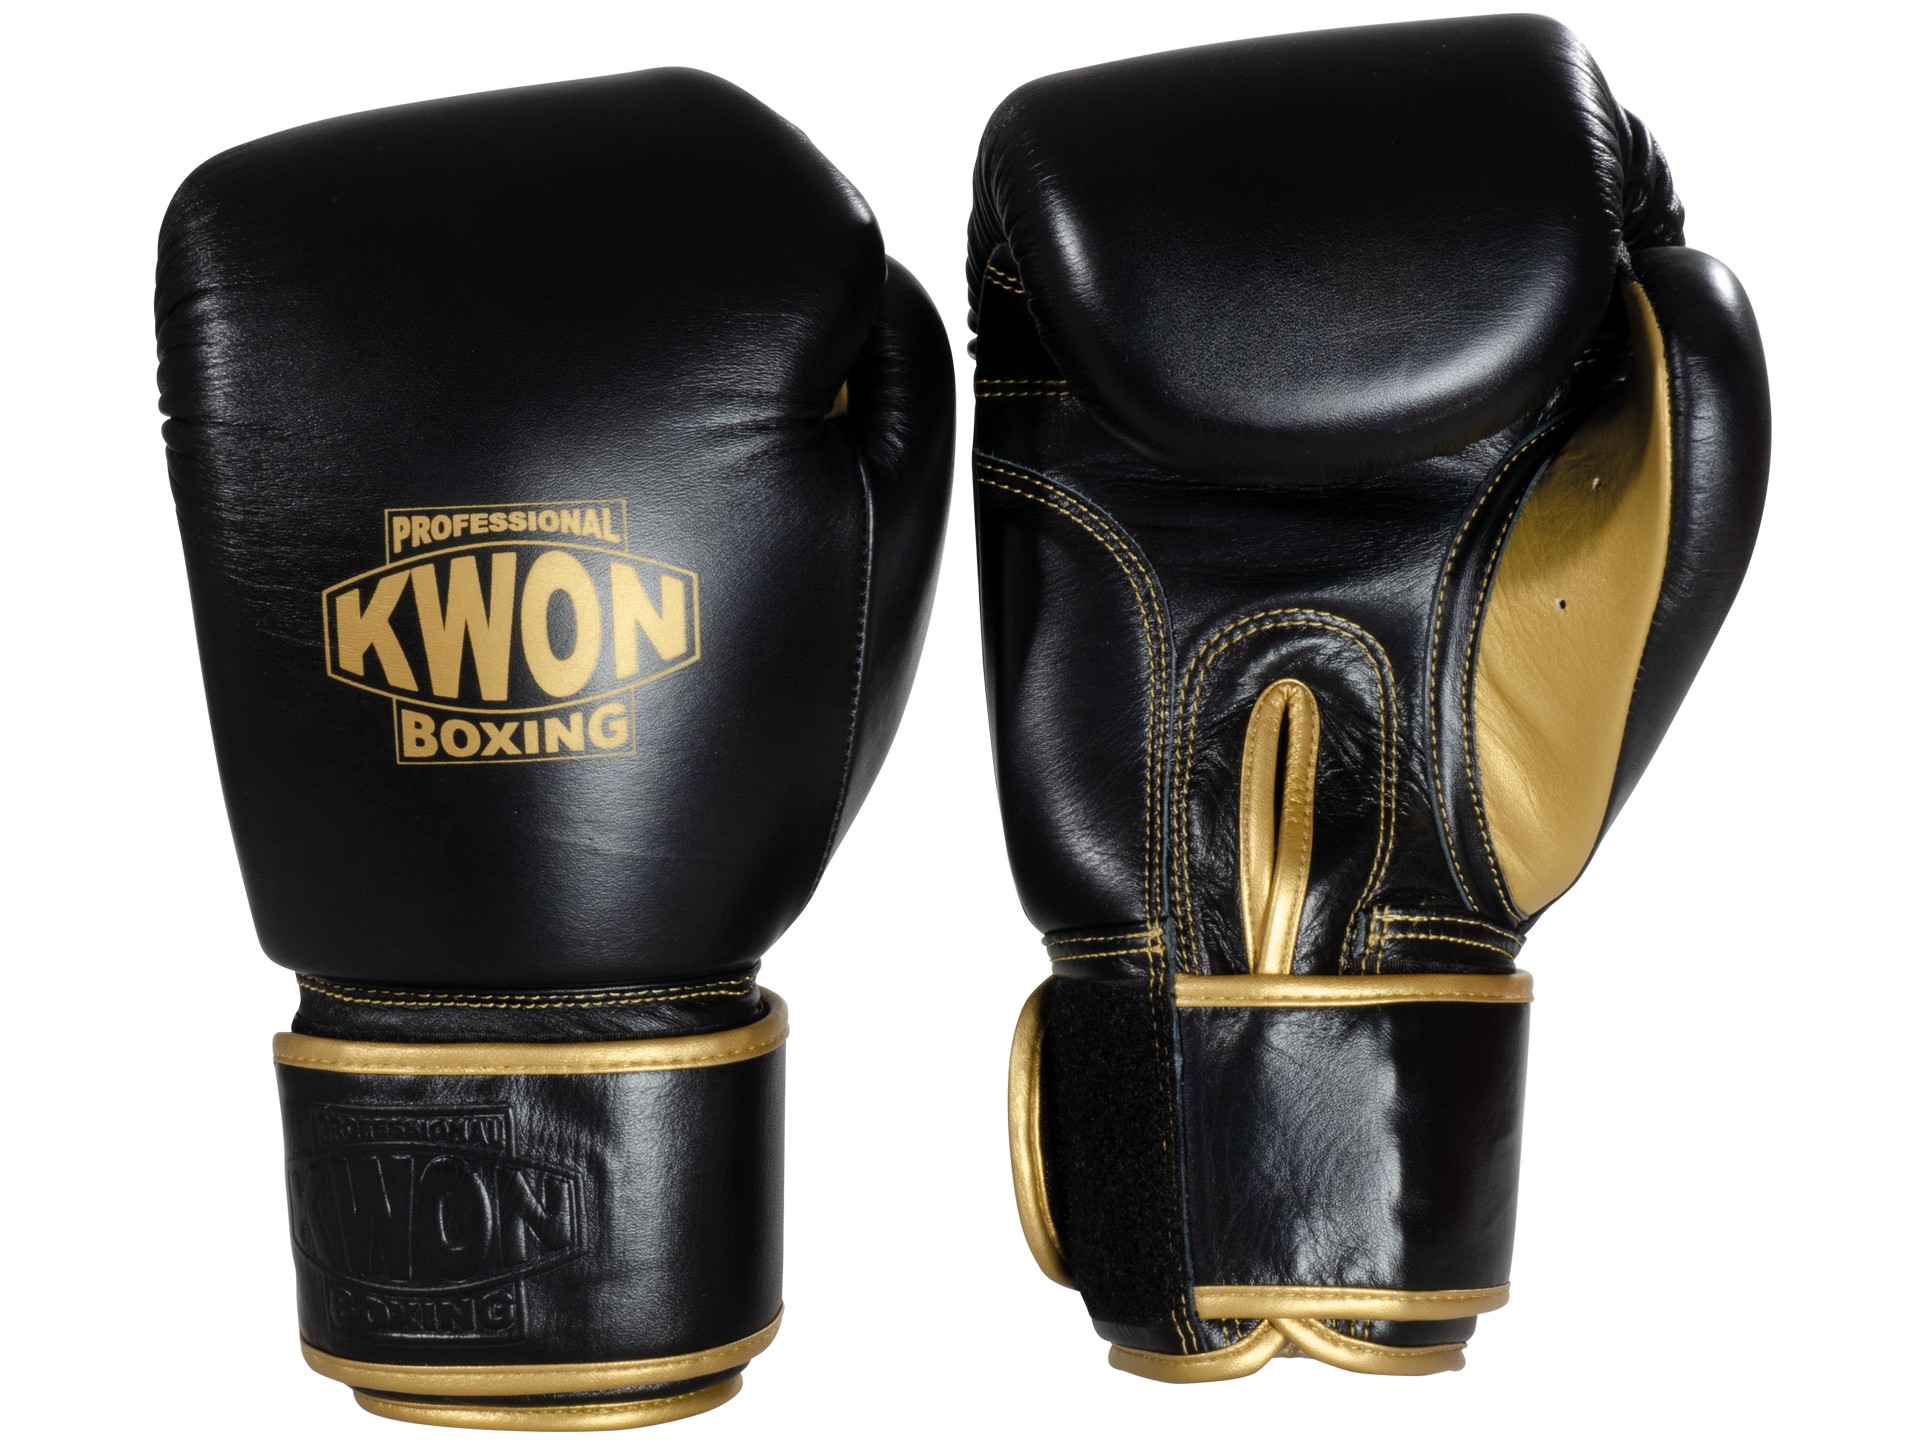 KWON PROFESSIONAL BOXING Gloves Leather Sparring Defensive for kickboxing |  Thai boxes with Velcro